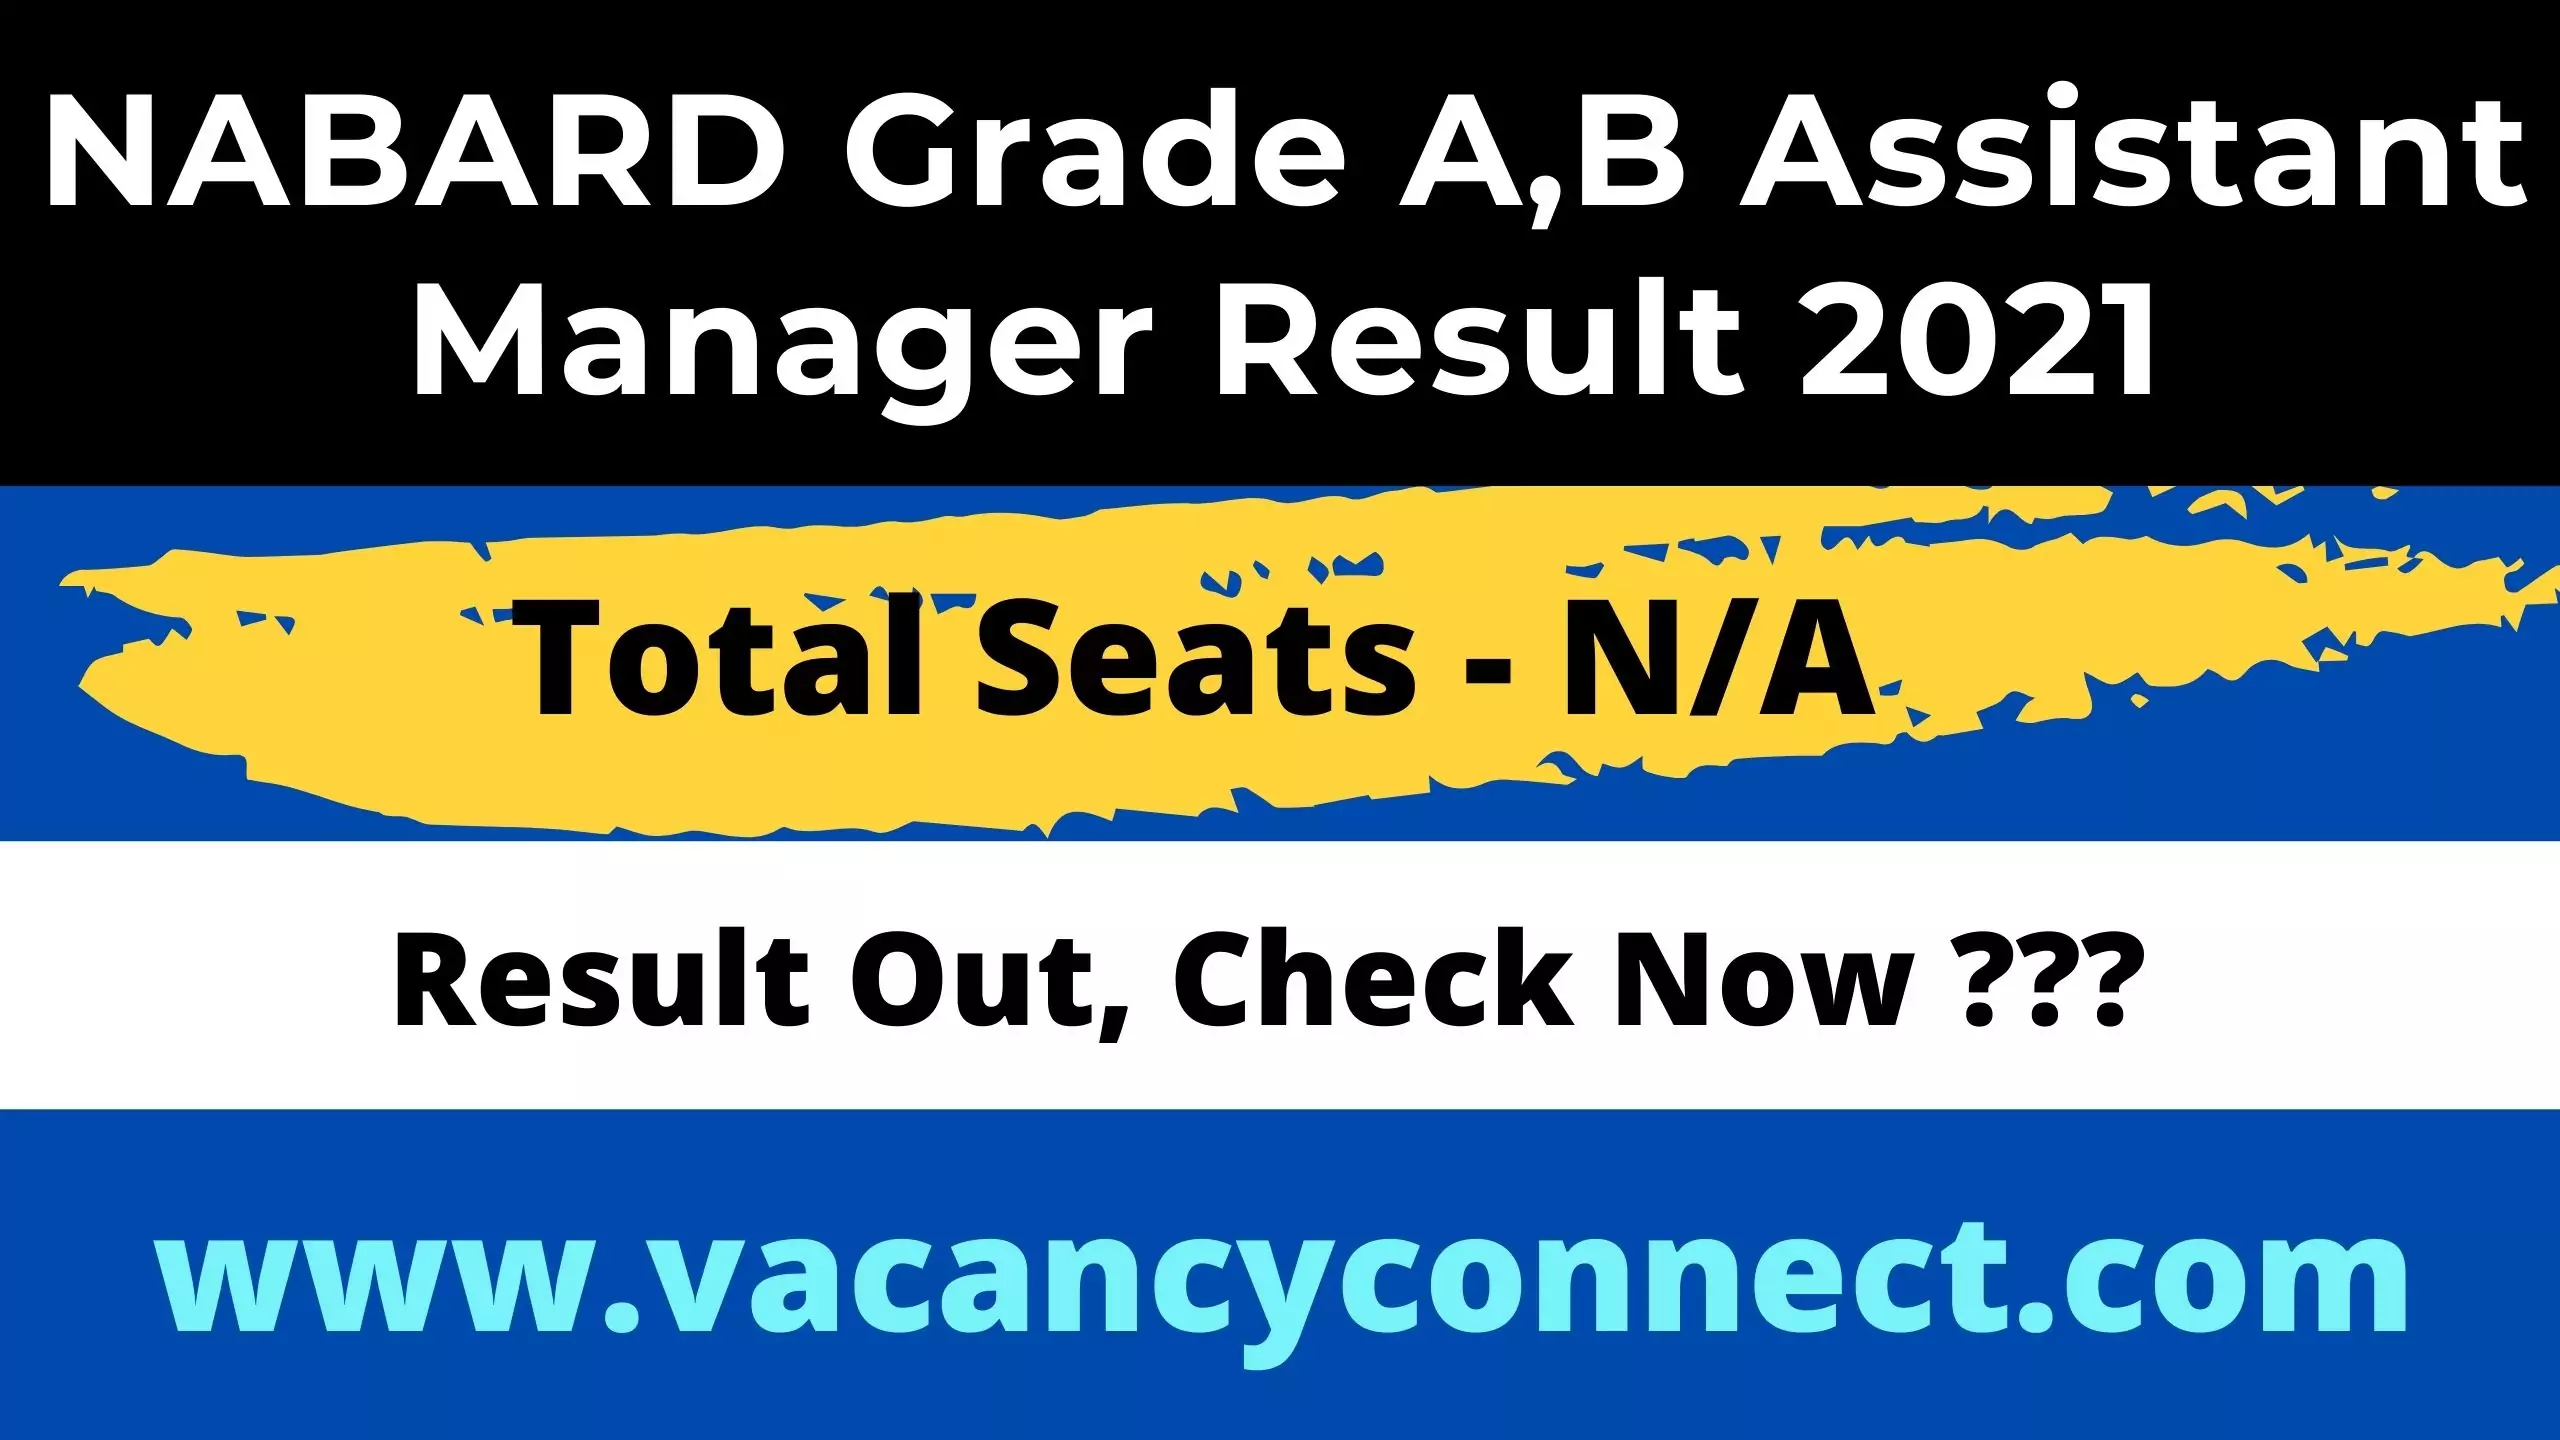 NABARD Grade A,B Assistant Manager Result 2021